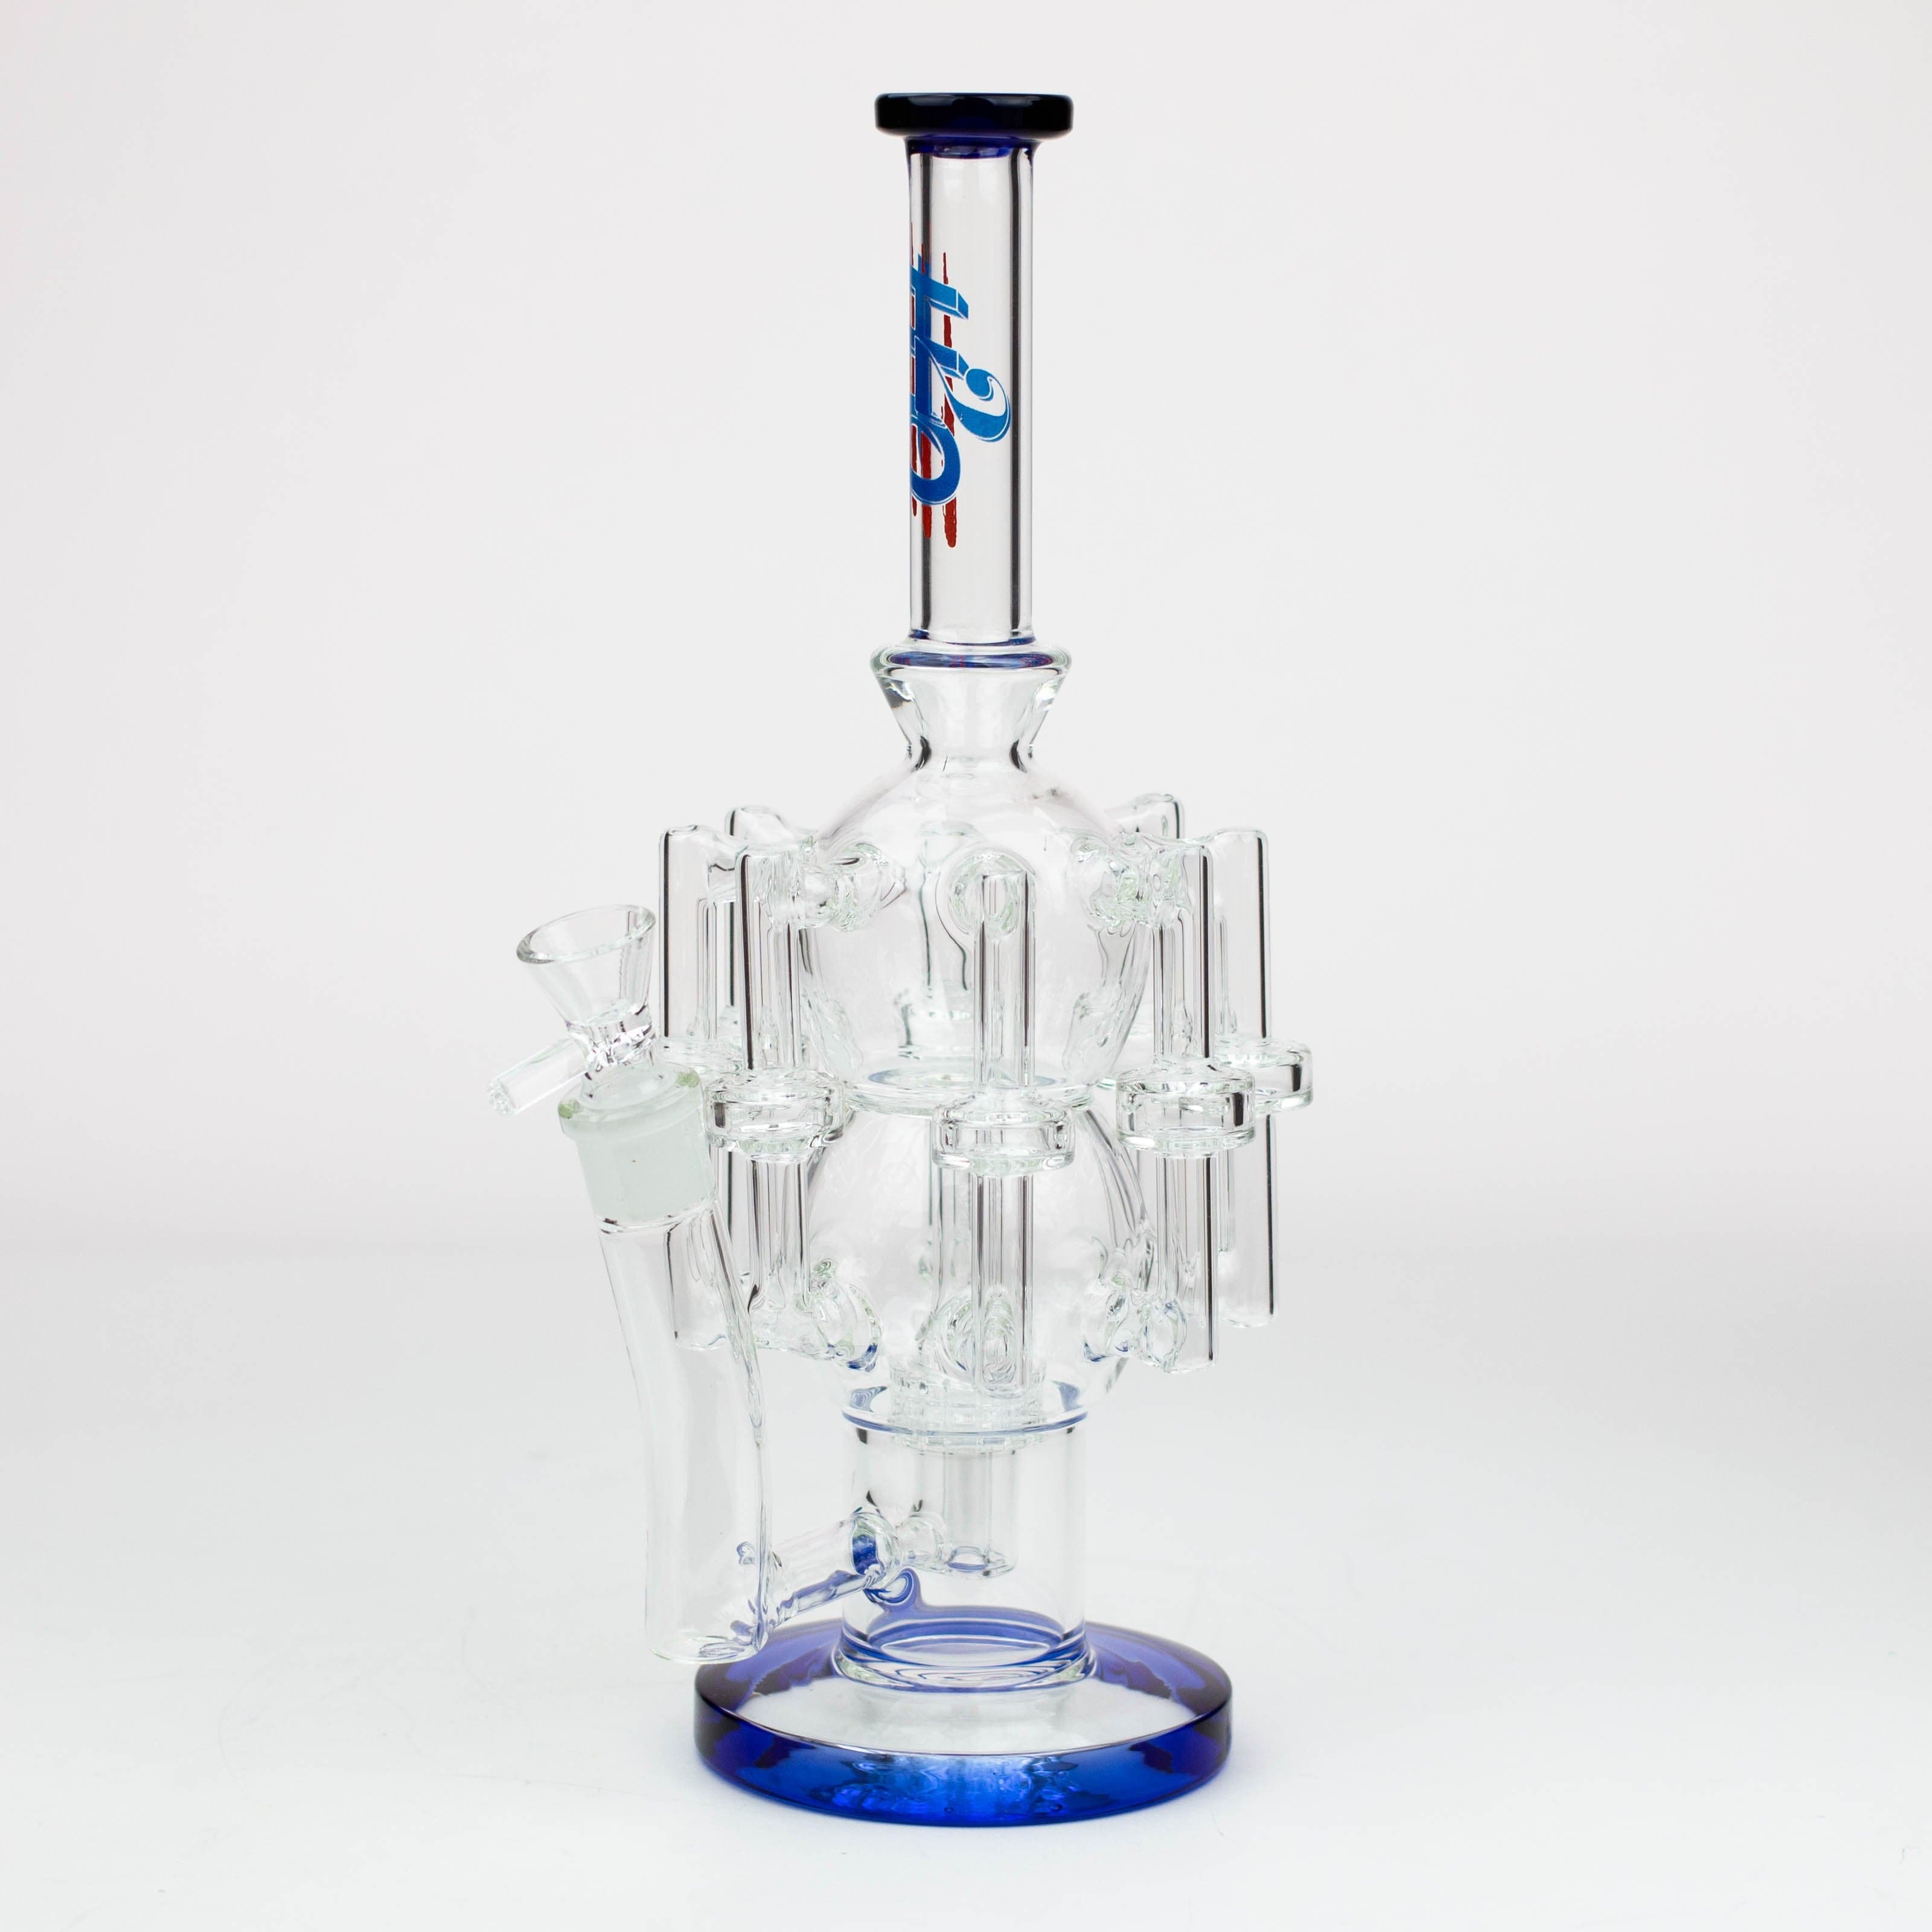 H2O Glass water recycle pipes 13.5"_2